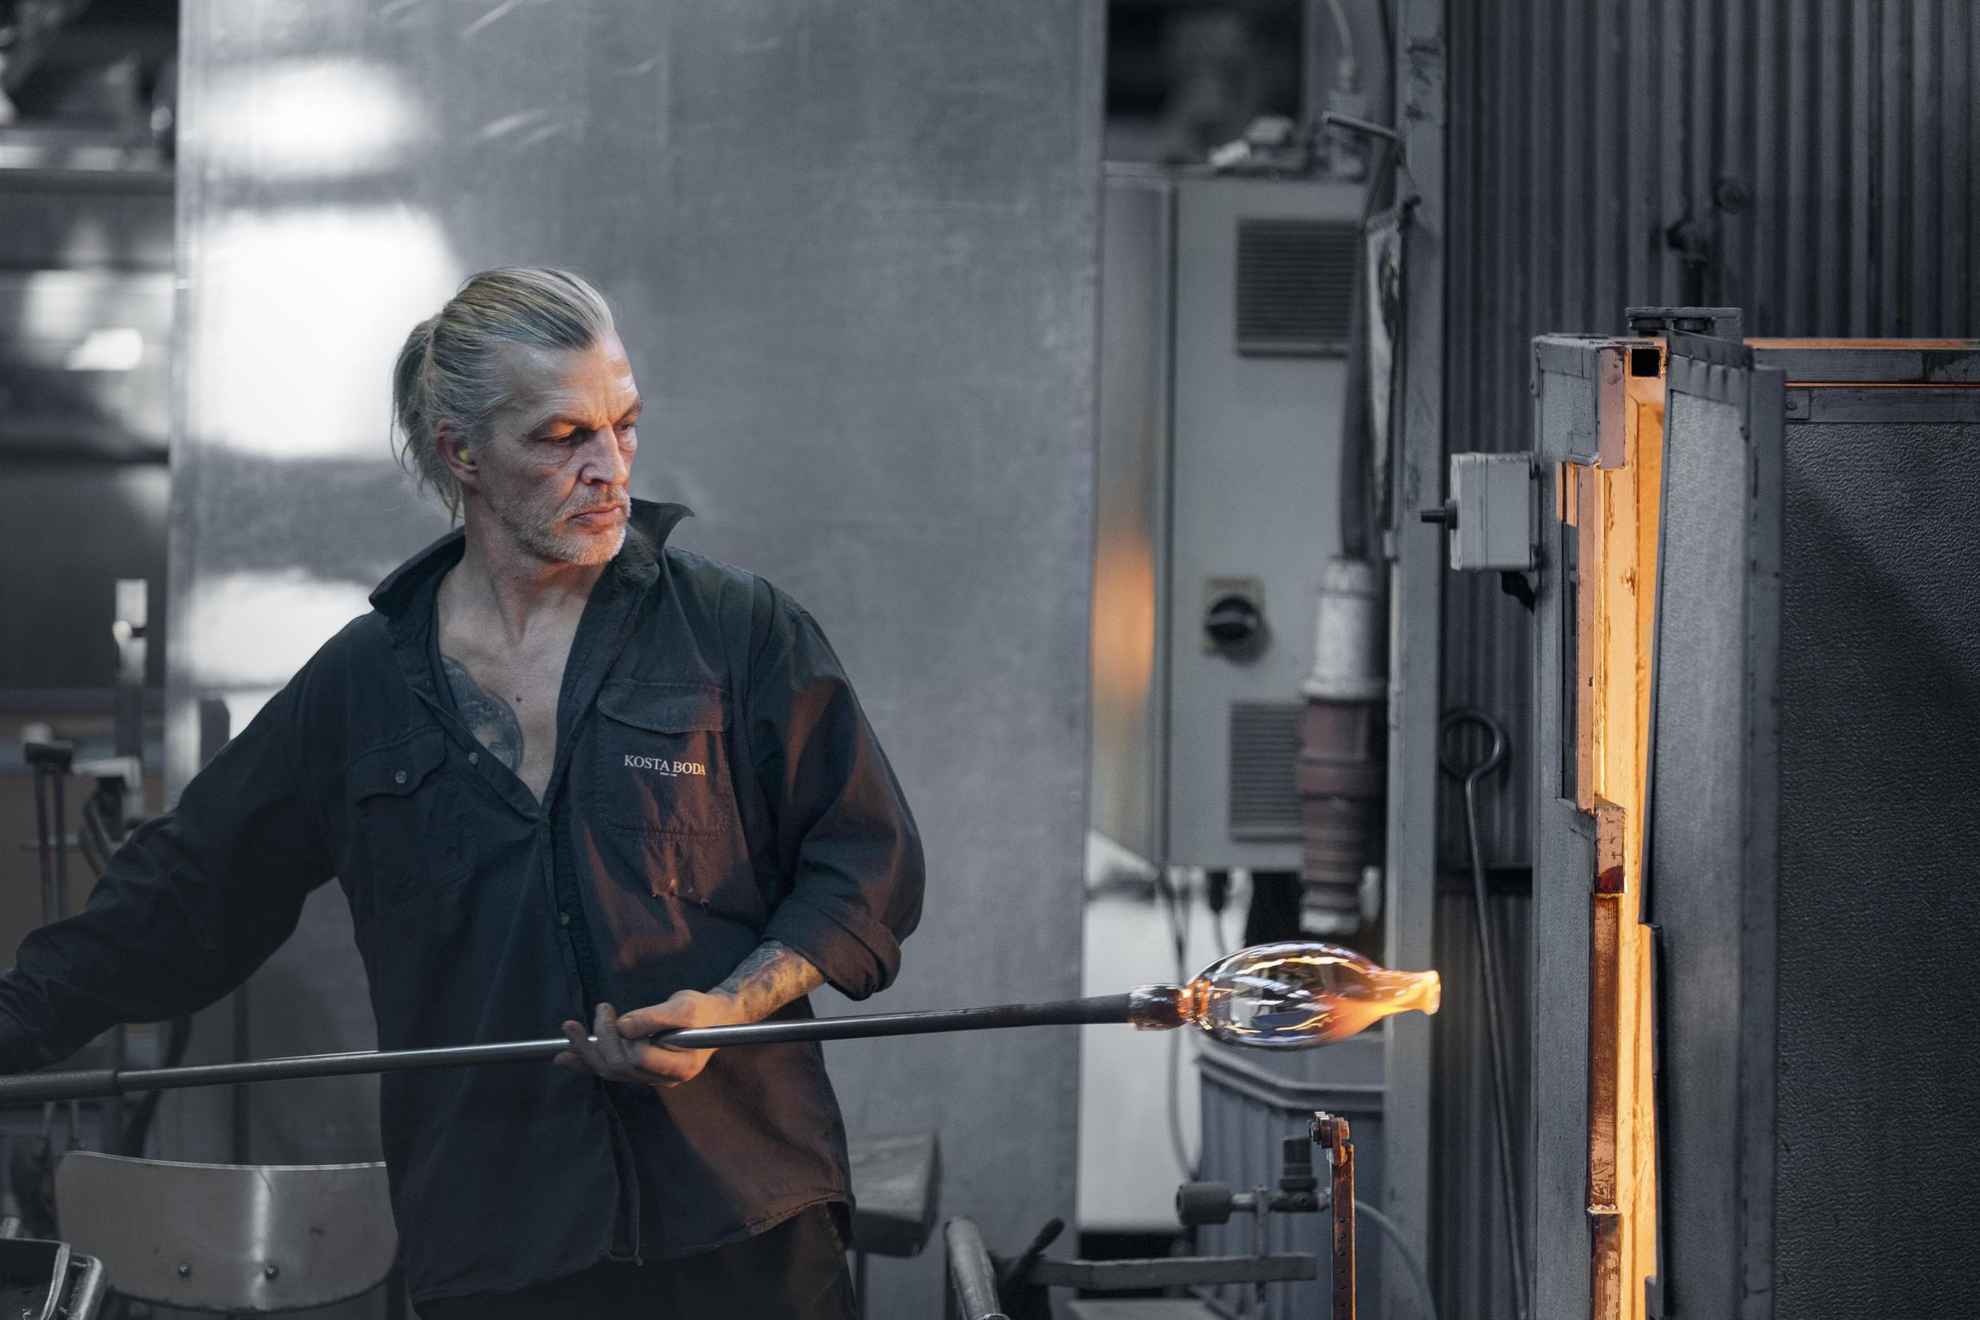 A glass blower working with hand-blown glass in a workshop.